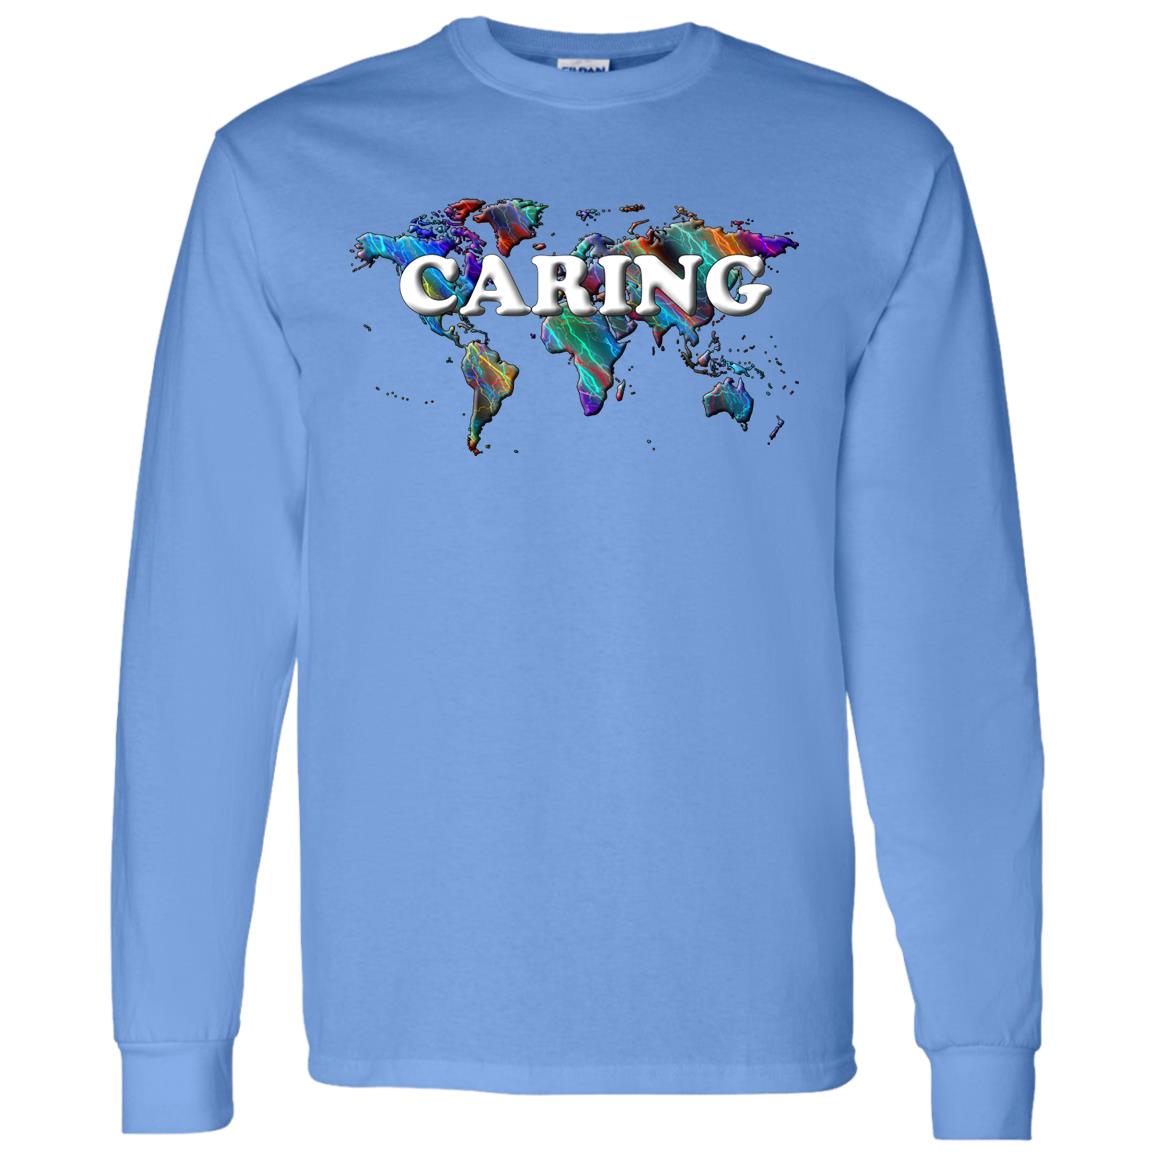 Caring Long Sleeve Statement T-Shirt